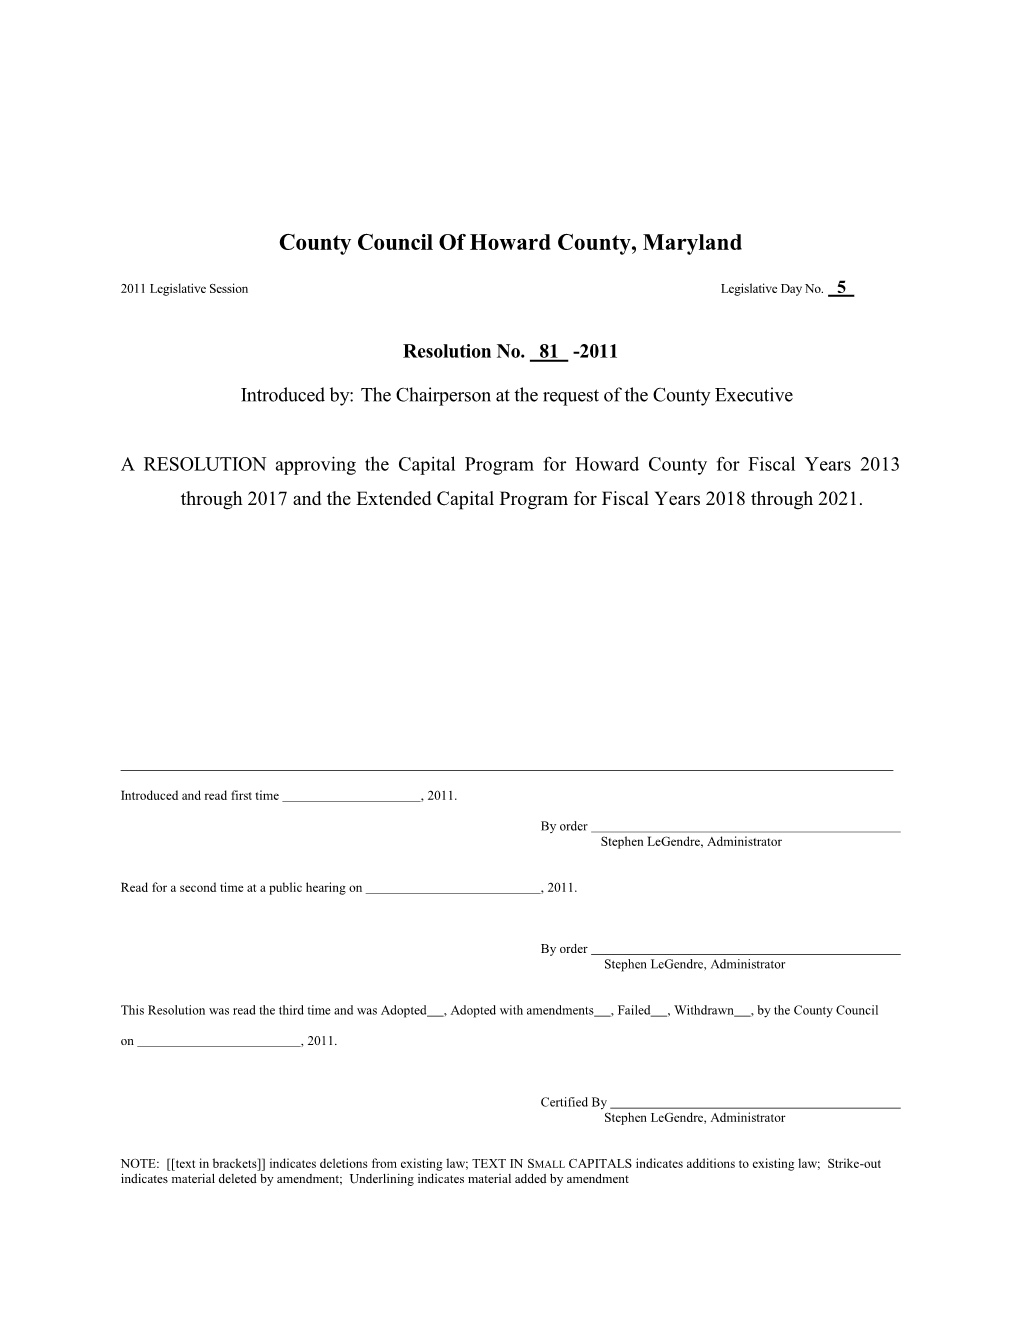 County Council of Howard County, Maryland